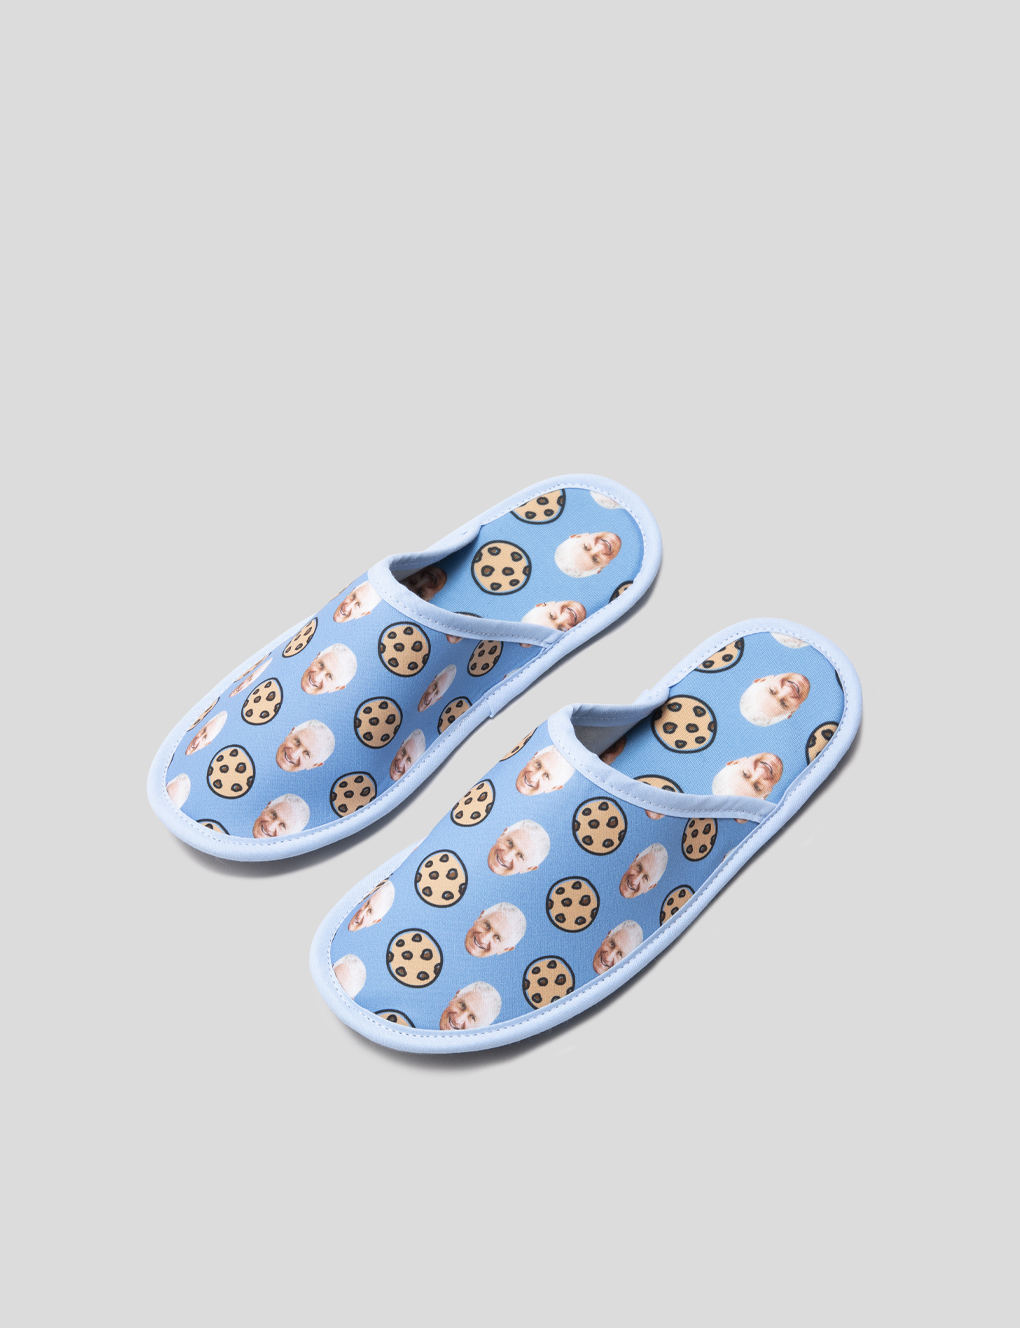 Face Slippers. Slippers with Faces on 